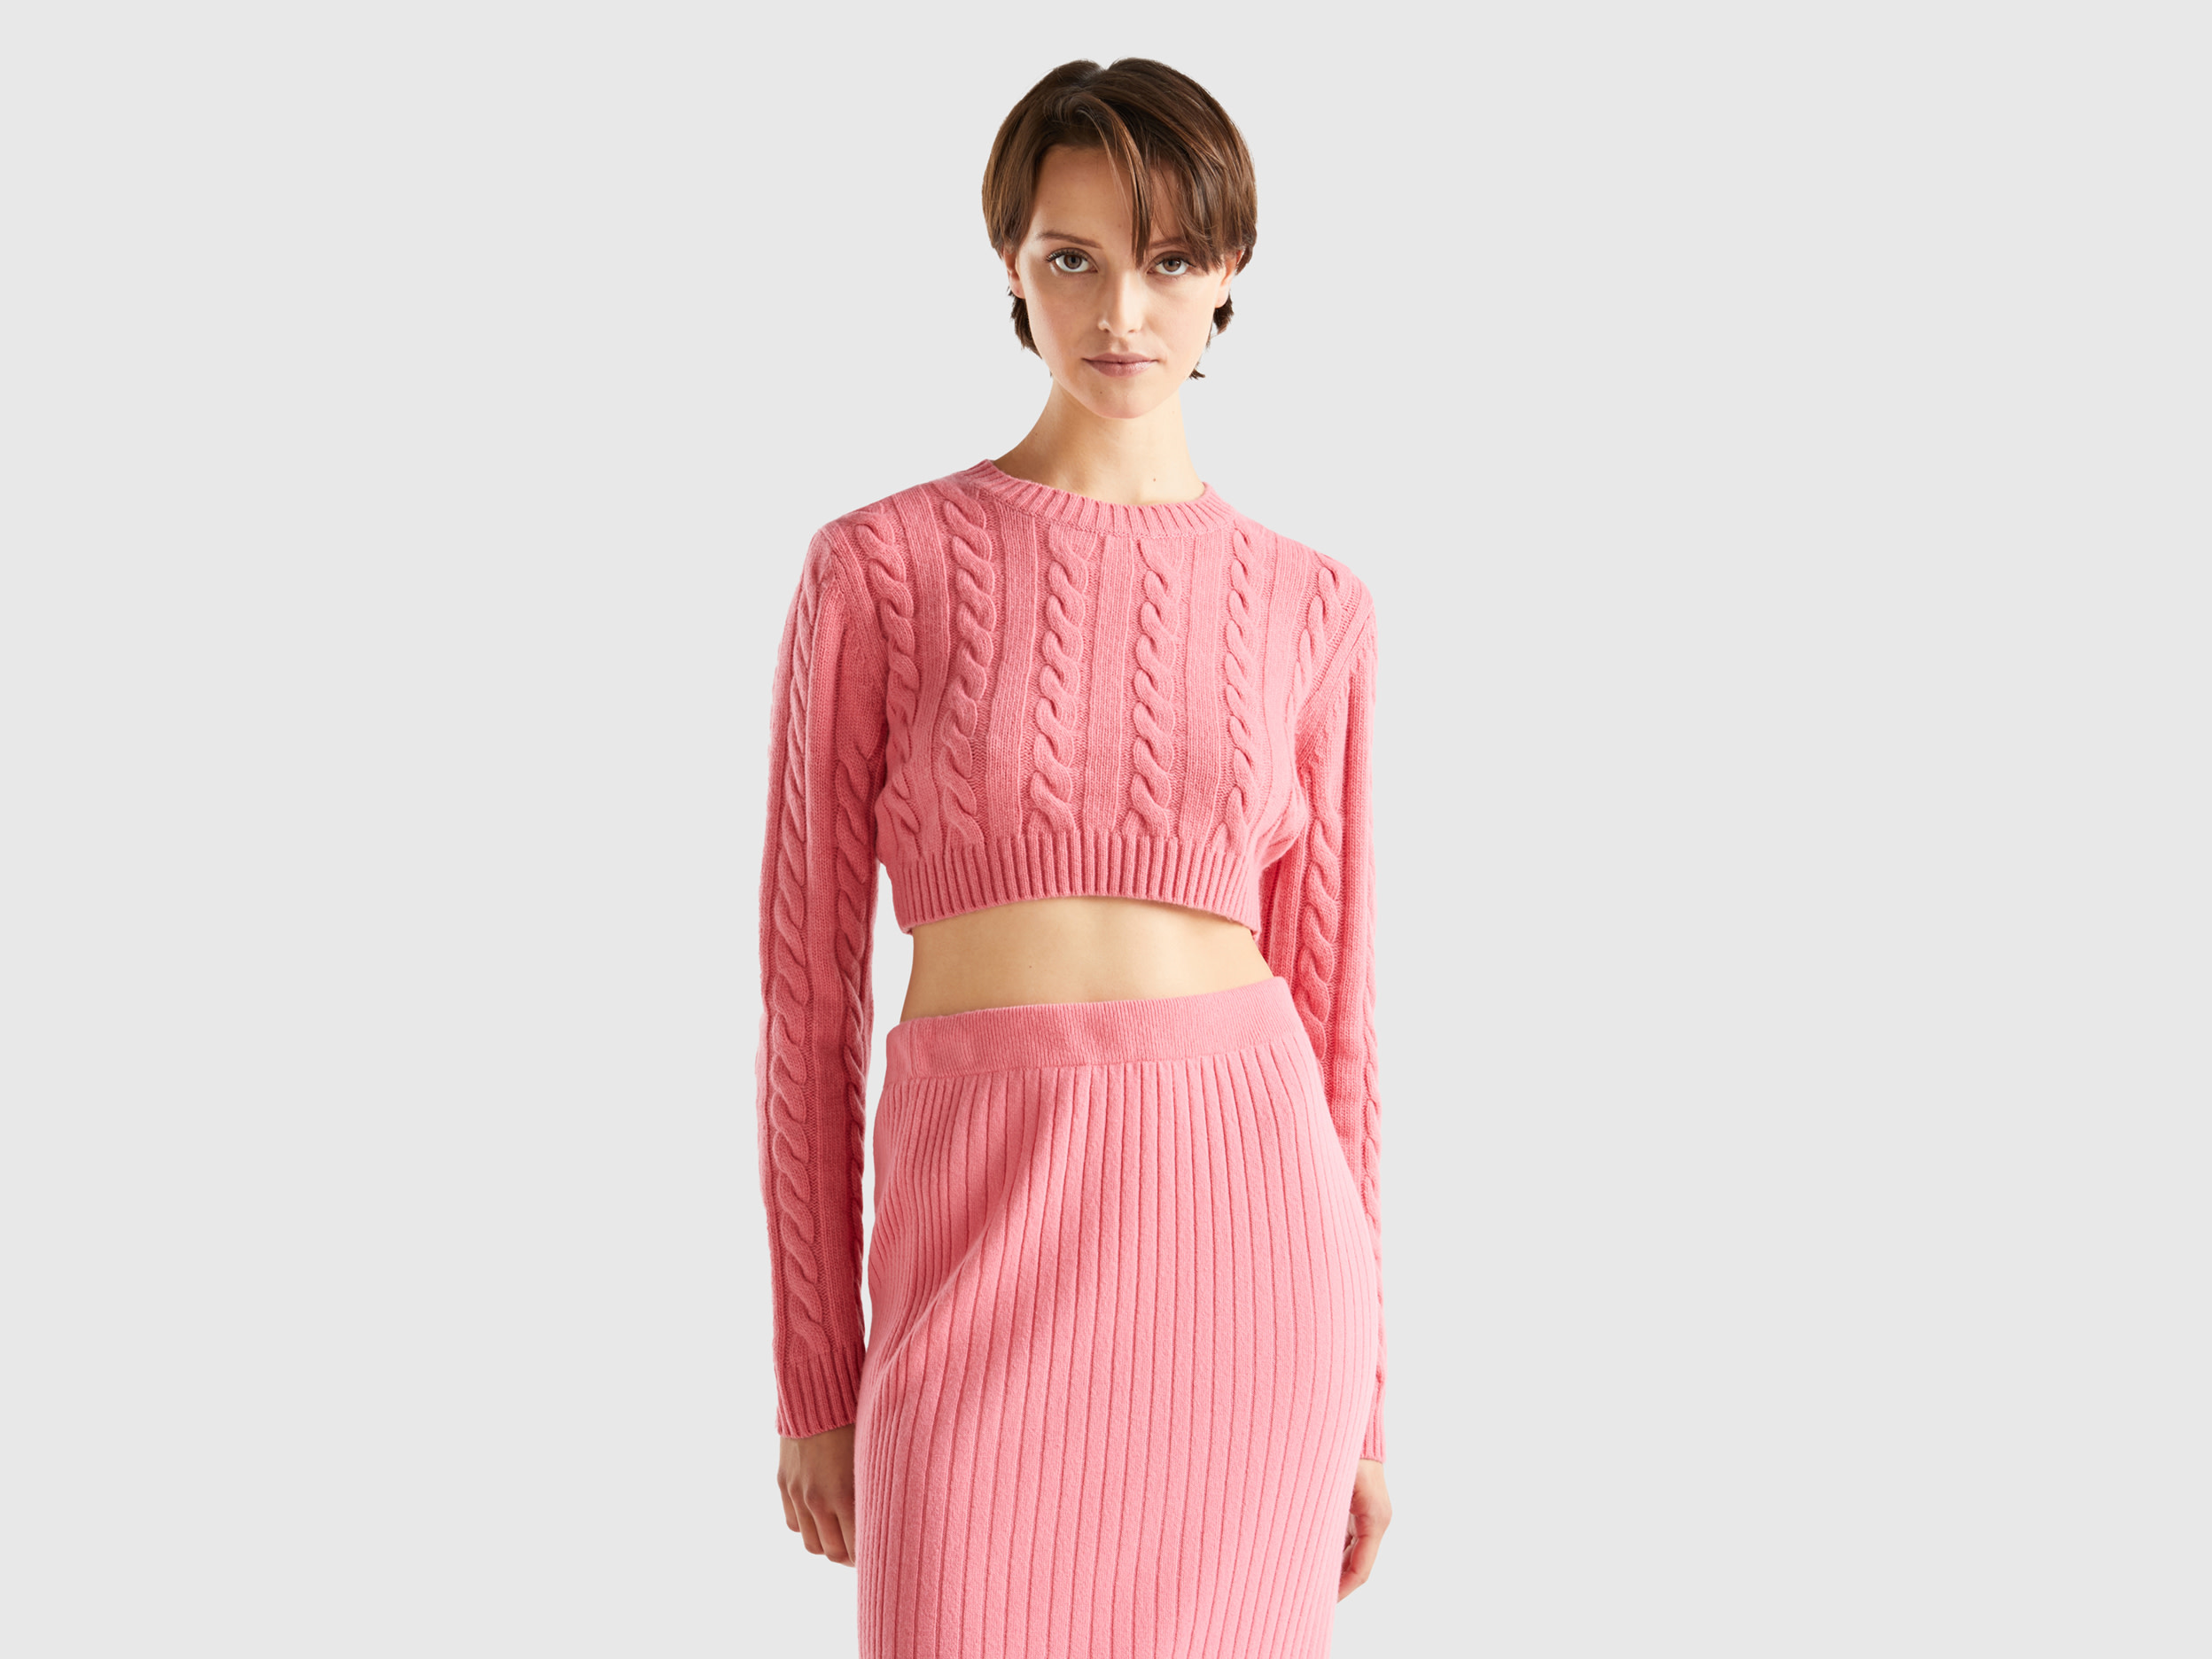 Benetton, Cropped Sweater With Cables, size L, Pink, Women